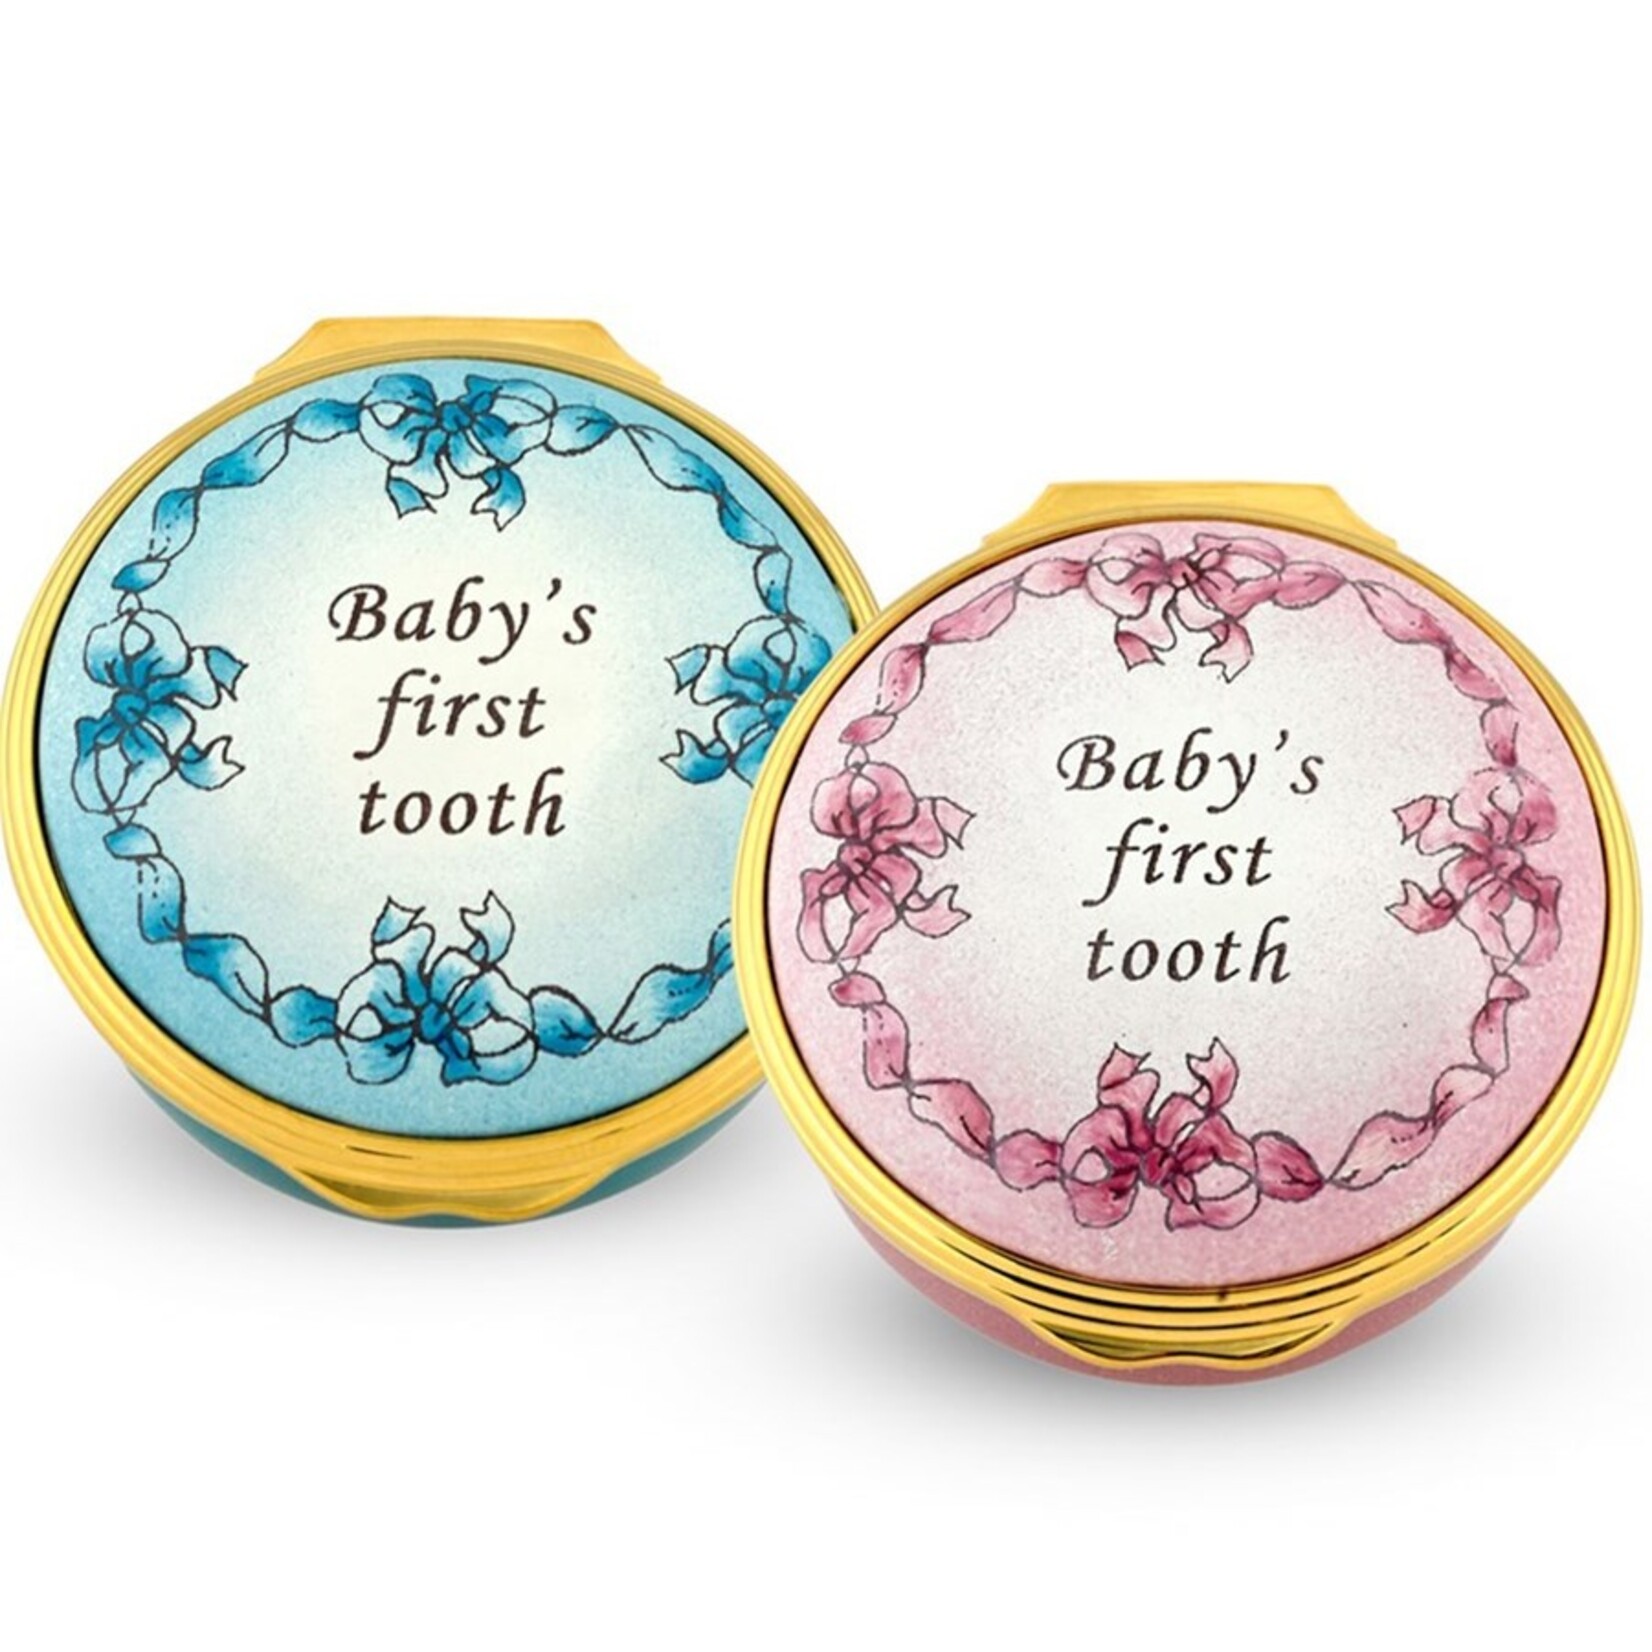 Halcyon Days Baby's First Tooth Box - Pink